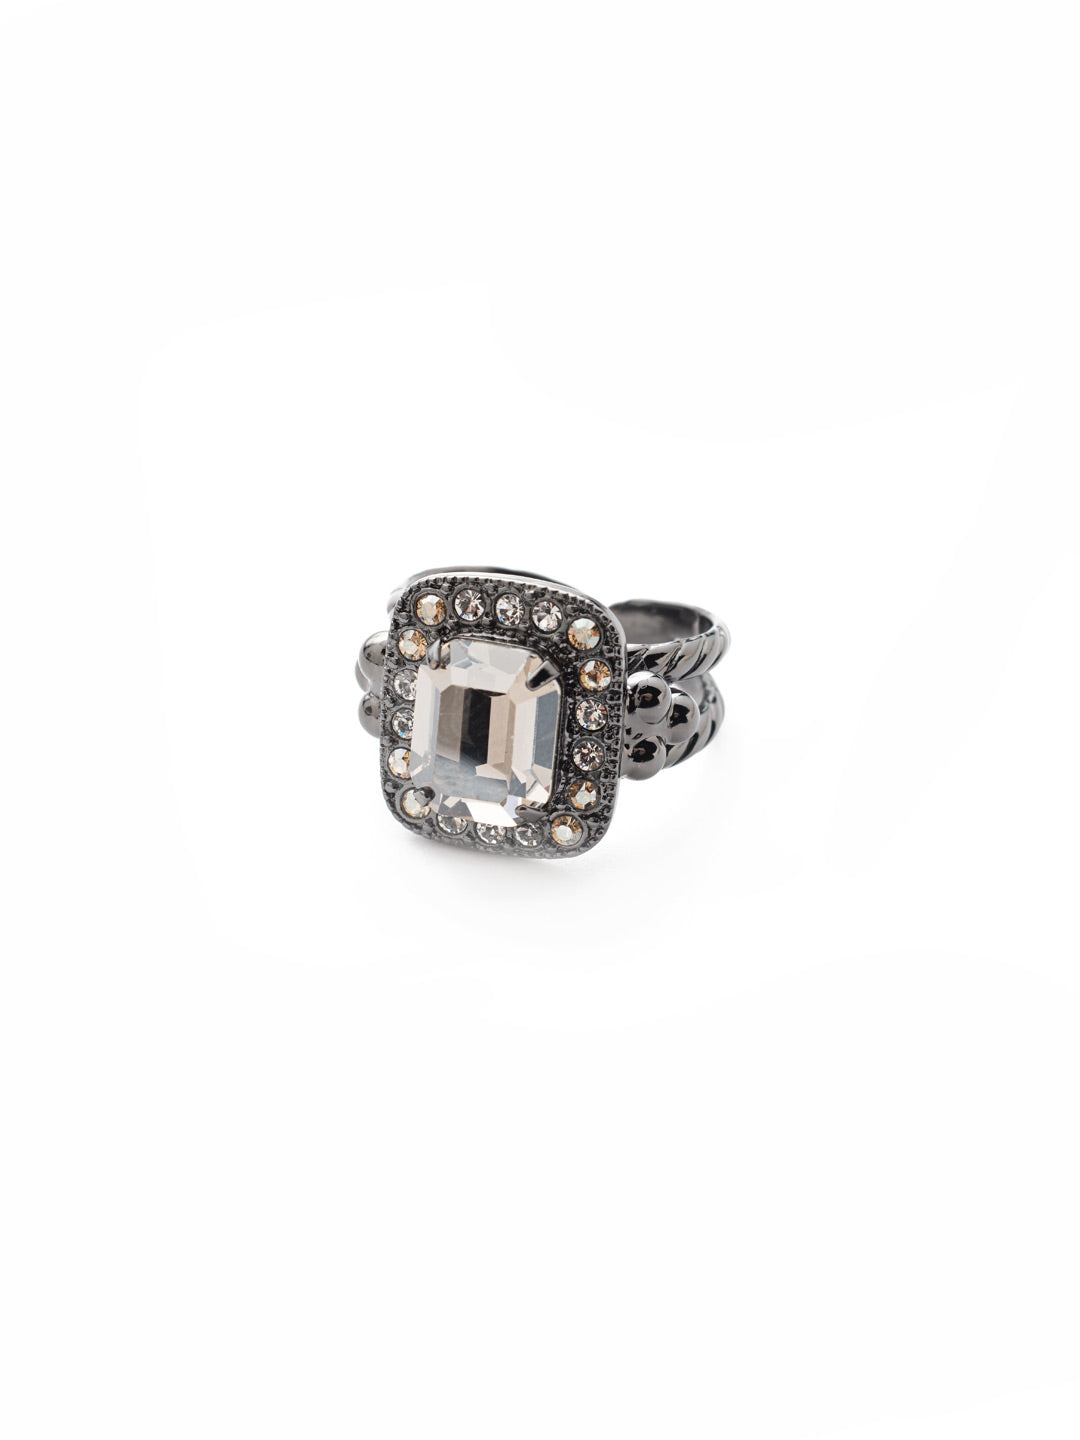 Opulent Octagon Cocktail Ring - RDQ41GMGNS